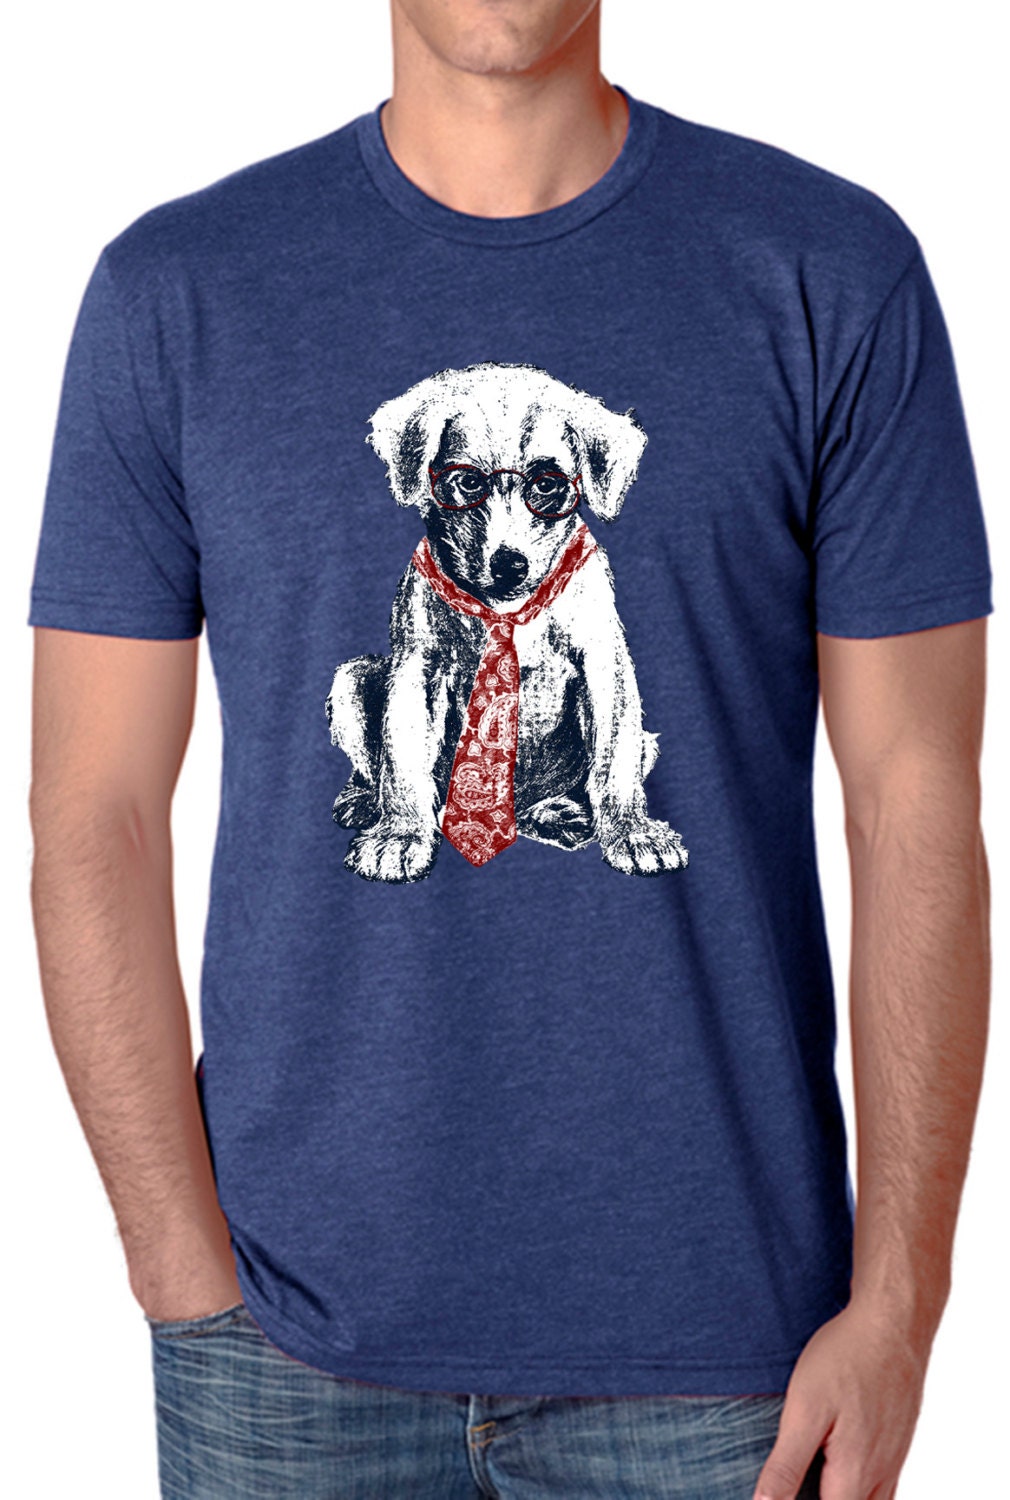 10 Pawsome Dog T-Shirt Recommendations to Flaunt Your Pet's Style ...